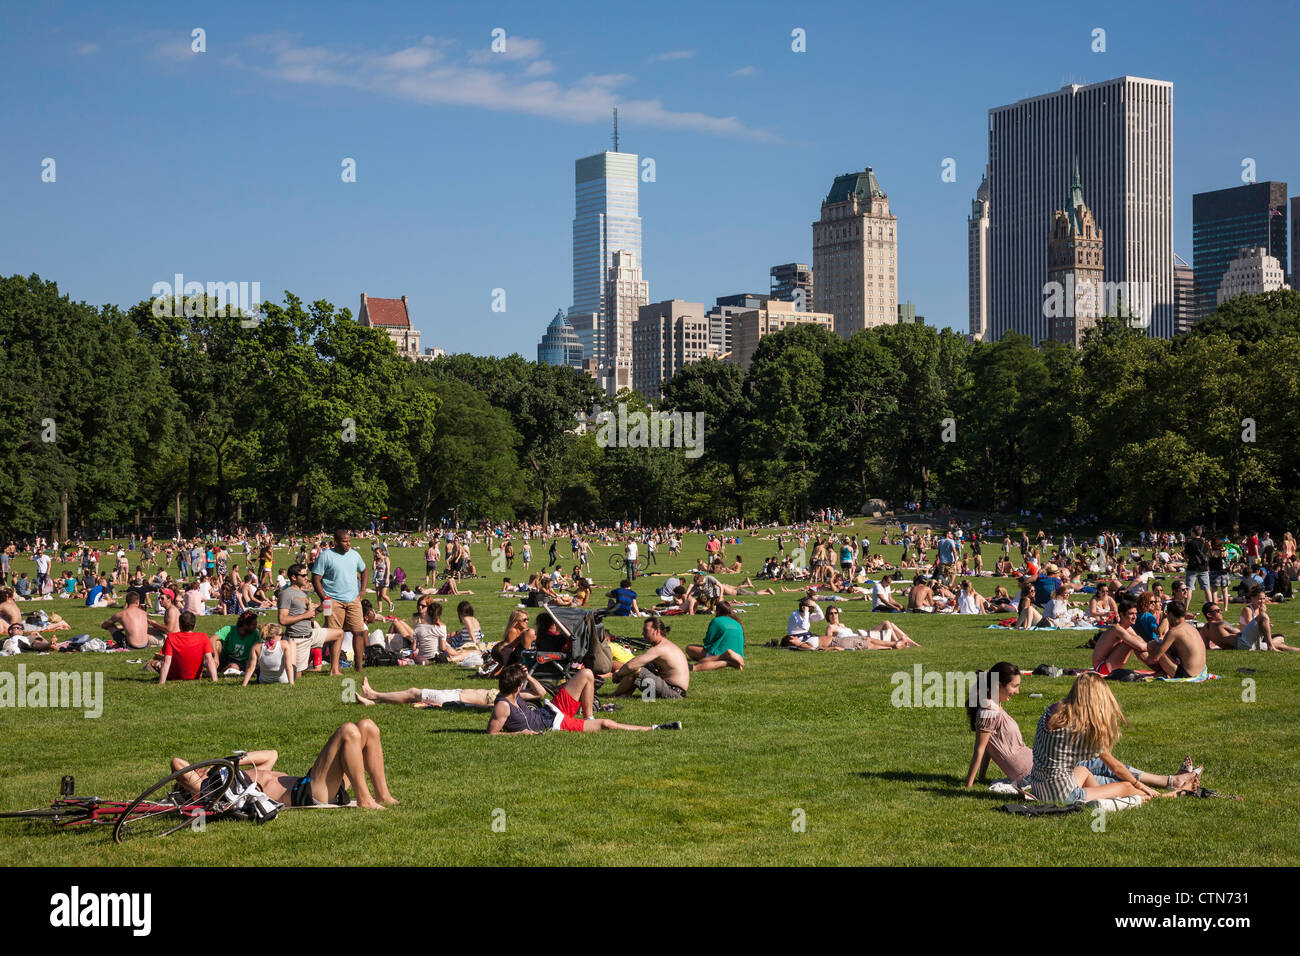 Sheep Meadow with Skyline in background, Central Park, NYC Stock Photo ...